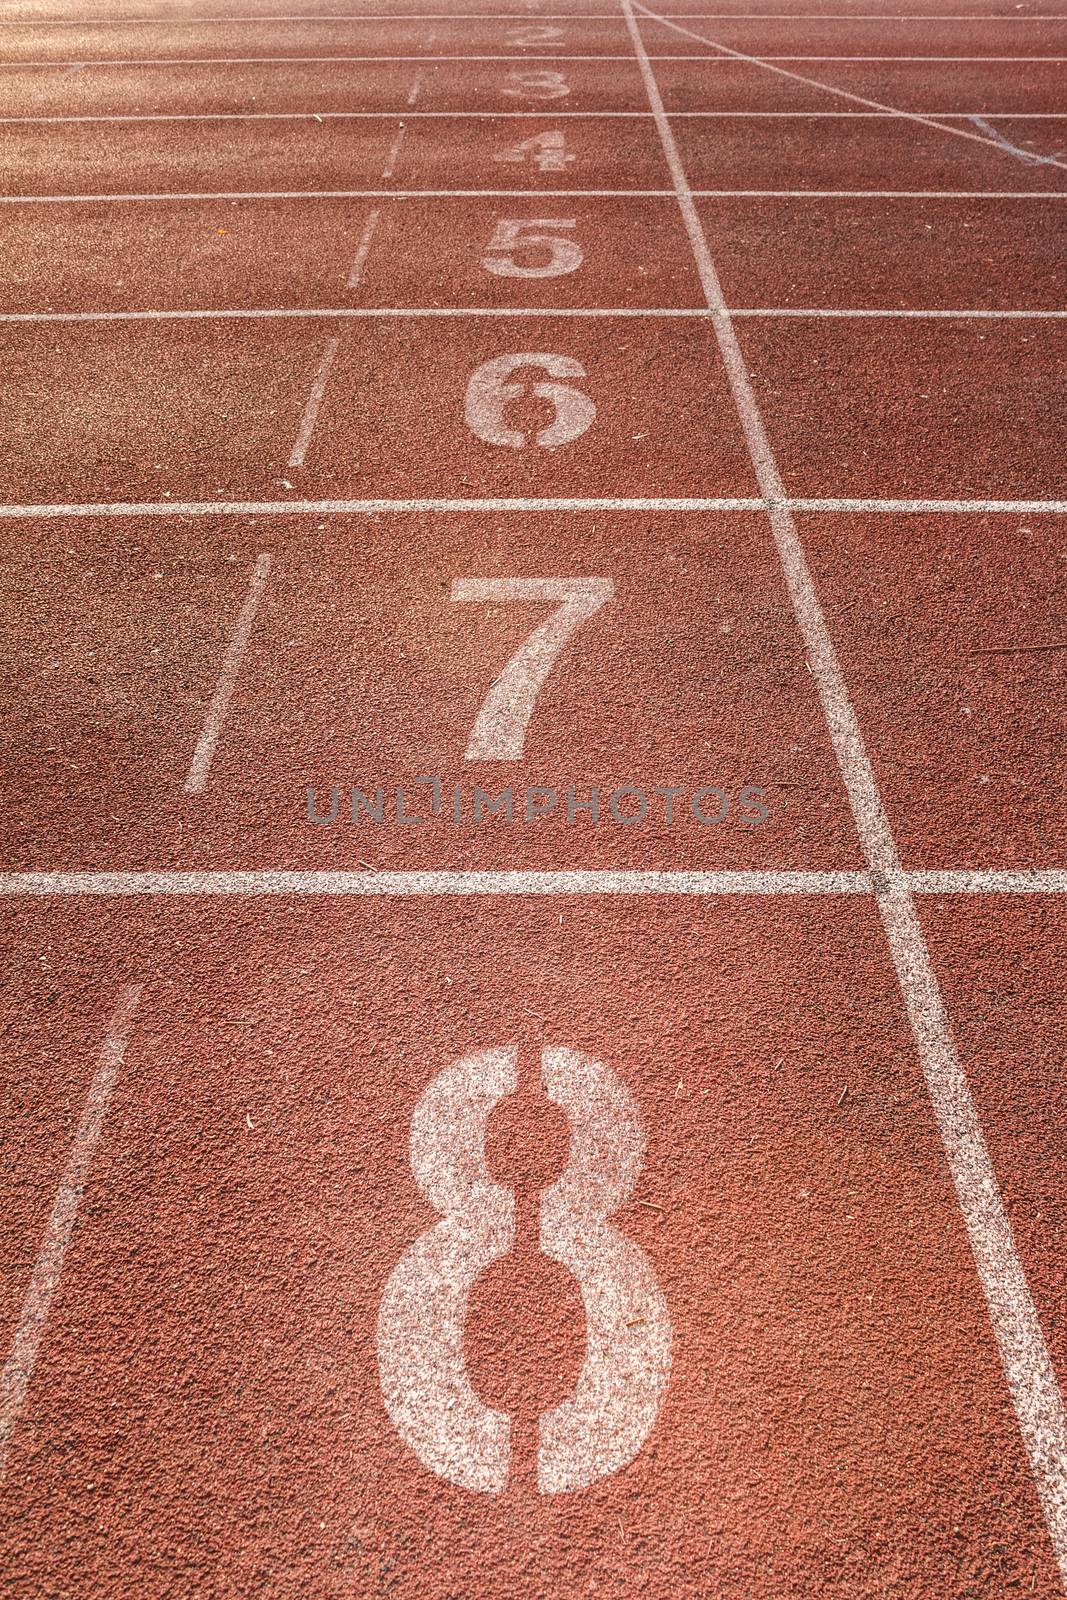 number on running track by letoakin